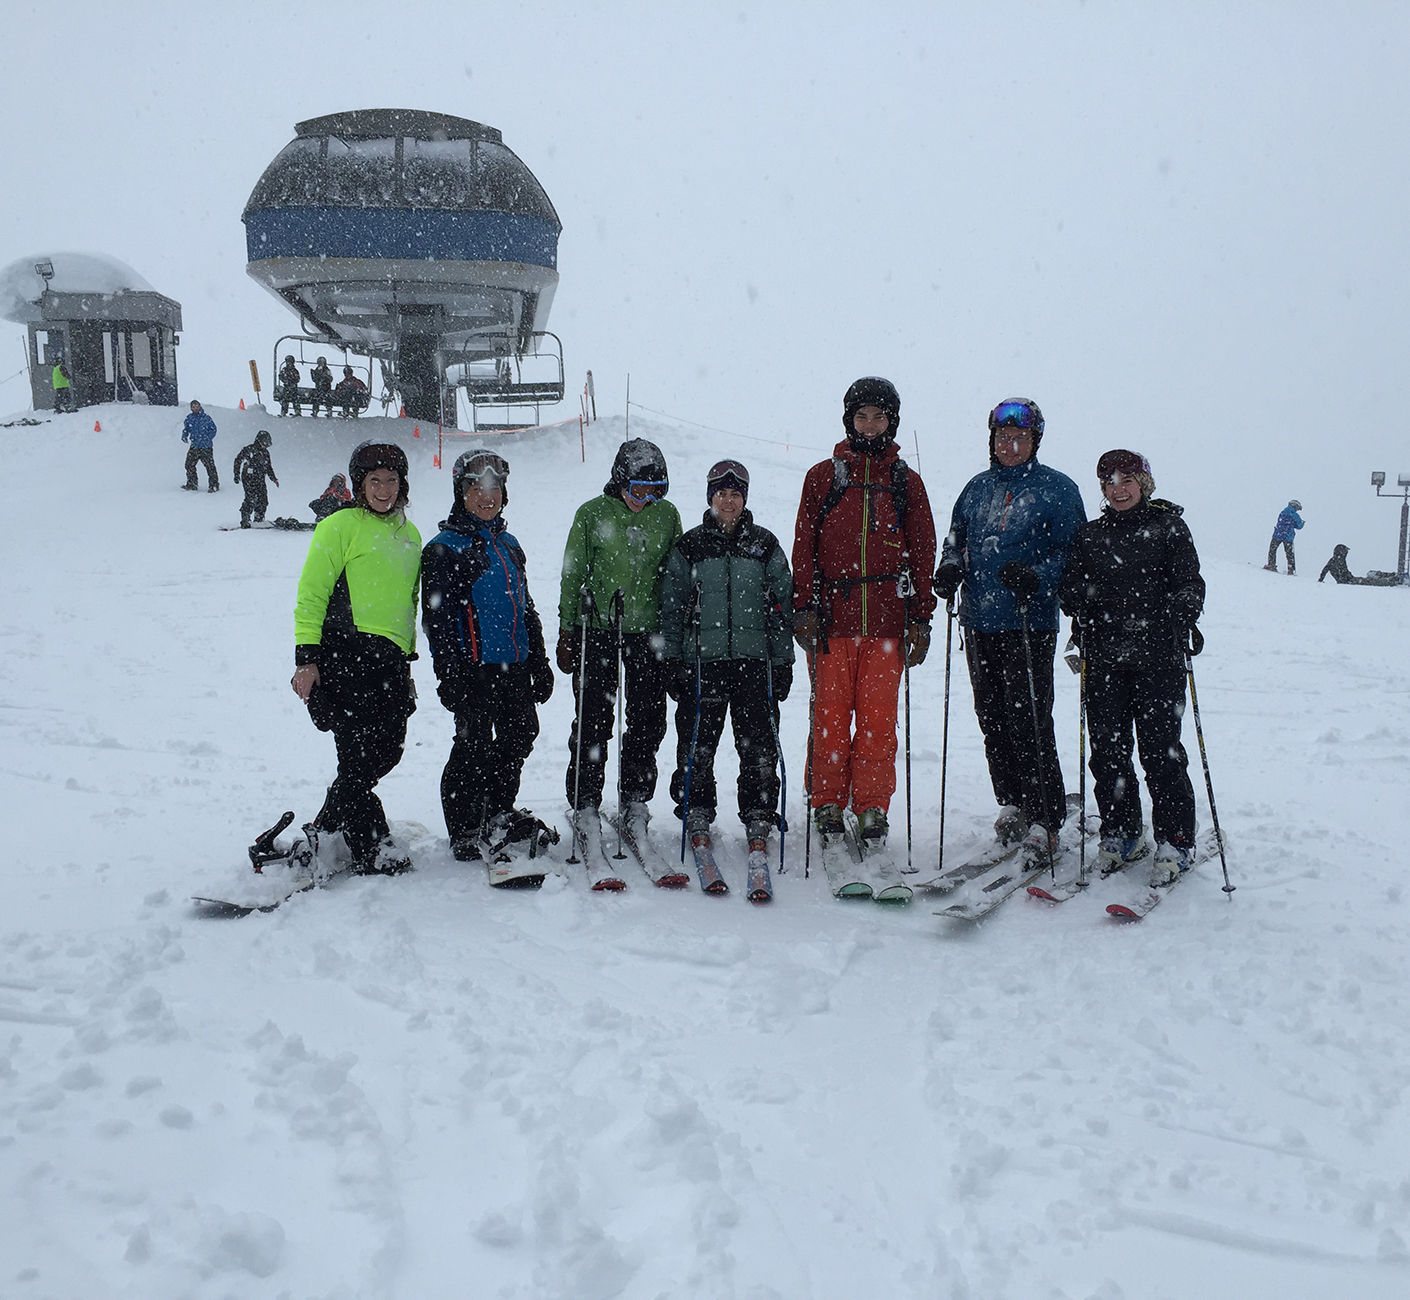 People on skis and snowboards on the top of a snowy mountain